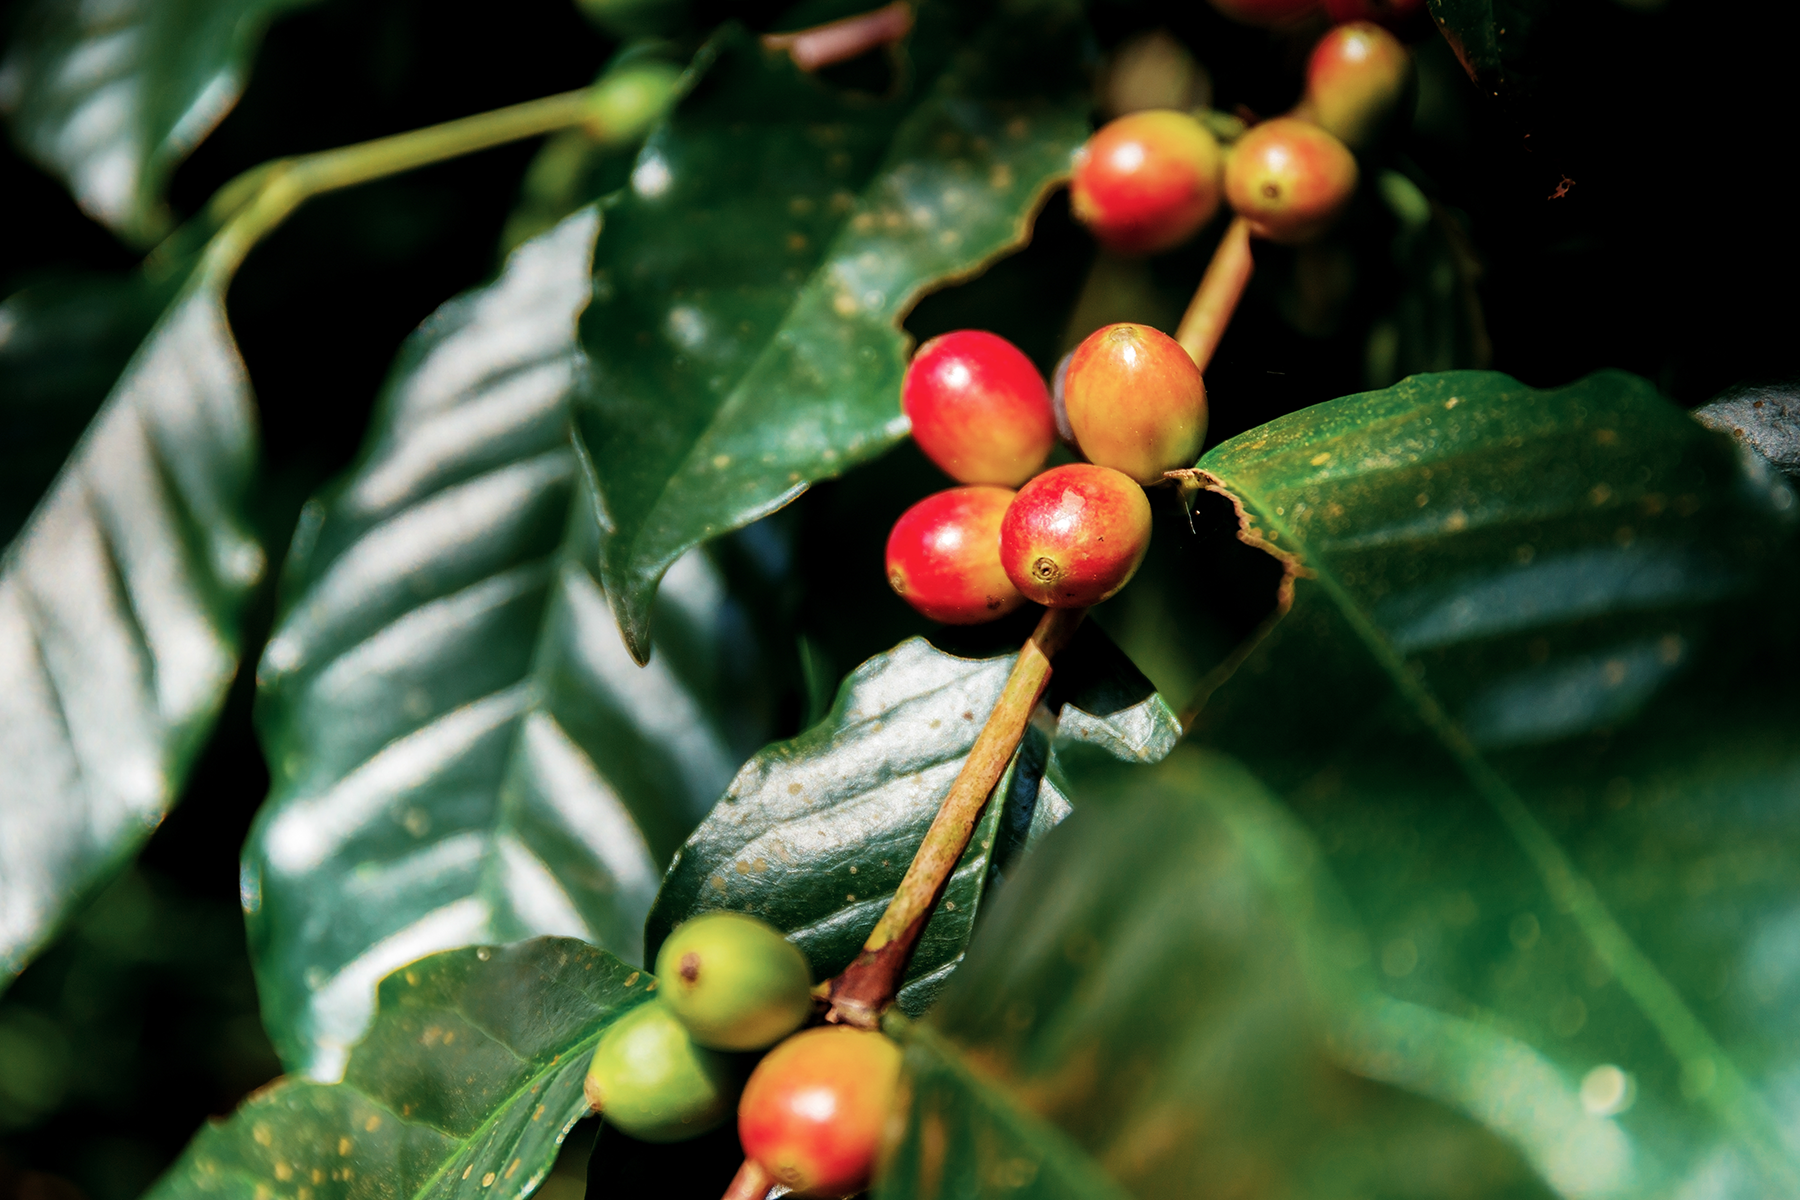 What changes can we expect in the coffee industry as a result of climate change?